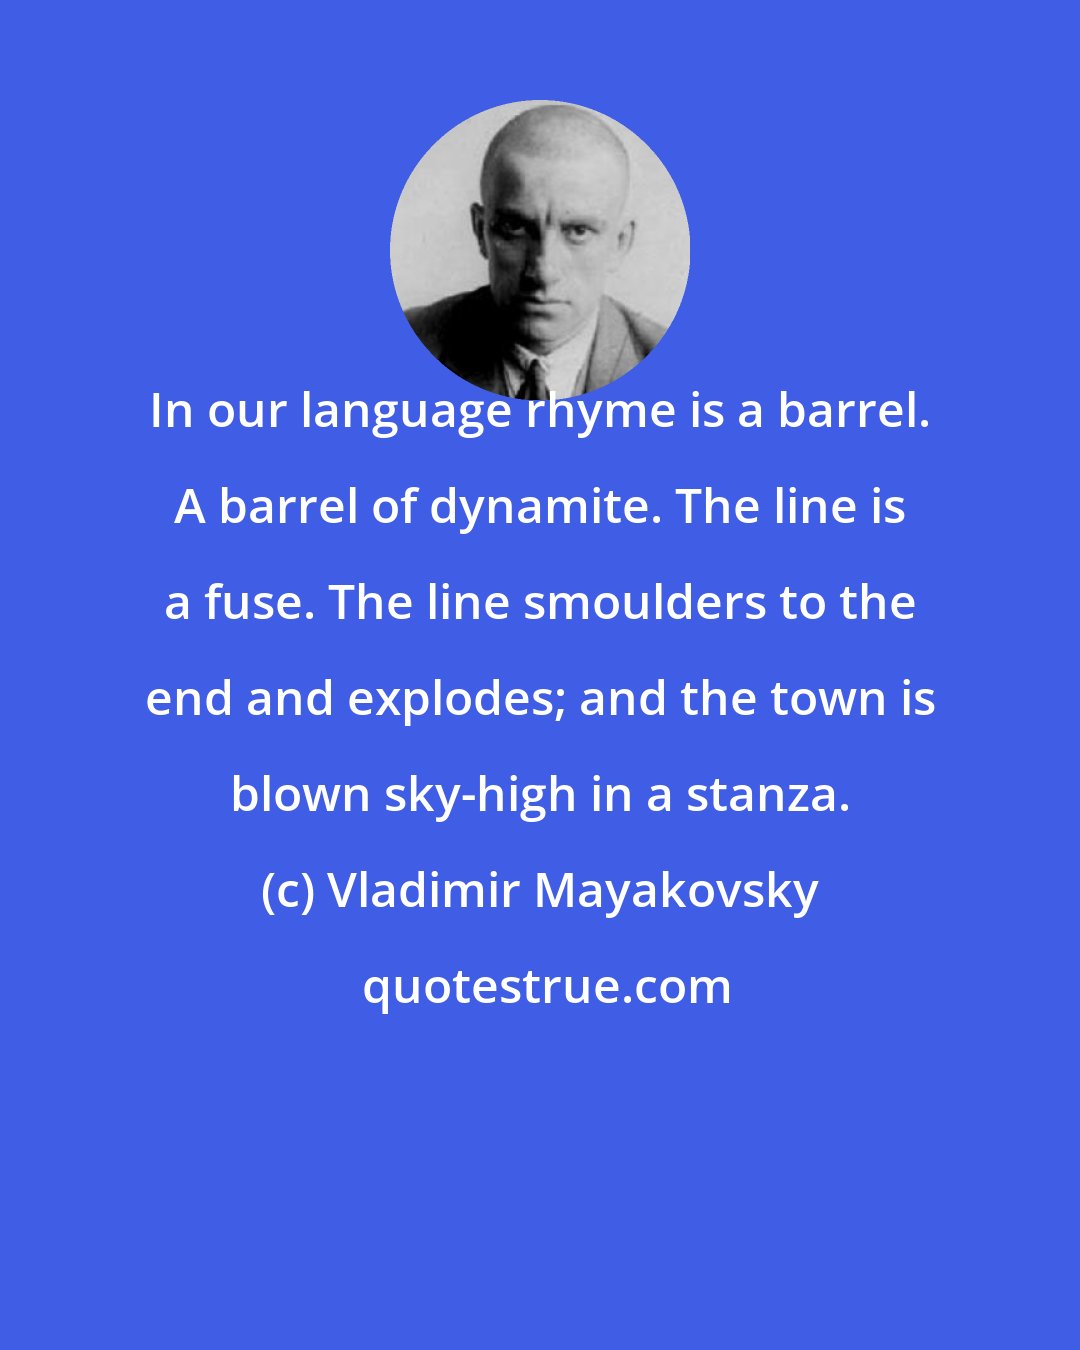 Vladimir Mayakovsky: In our language rhyme is a barrel. A barrel of dynamite. The line is a fuse. The line smoulders to the end and explodes; and the town is blown sky-high in a stanza.